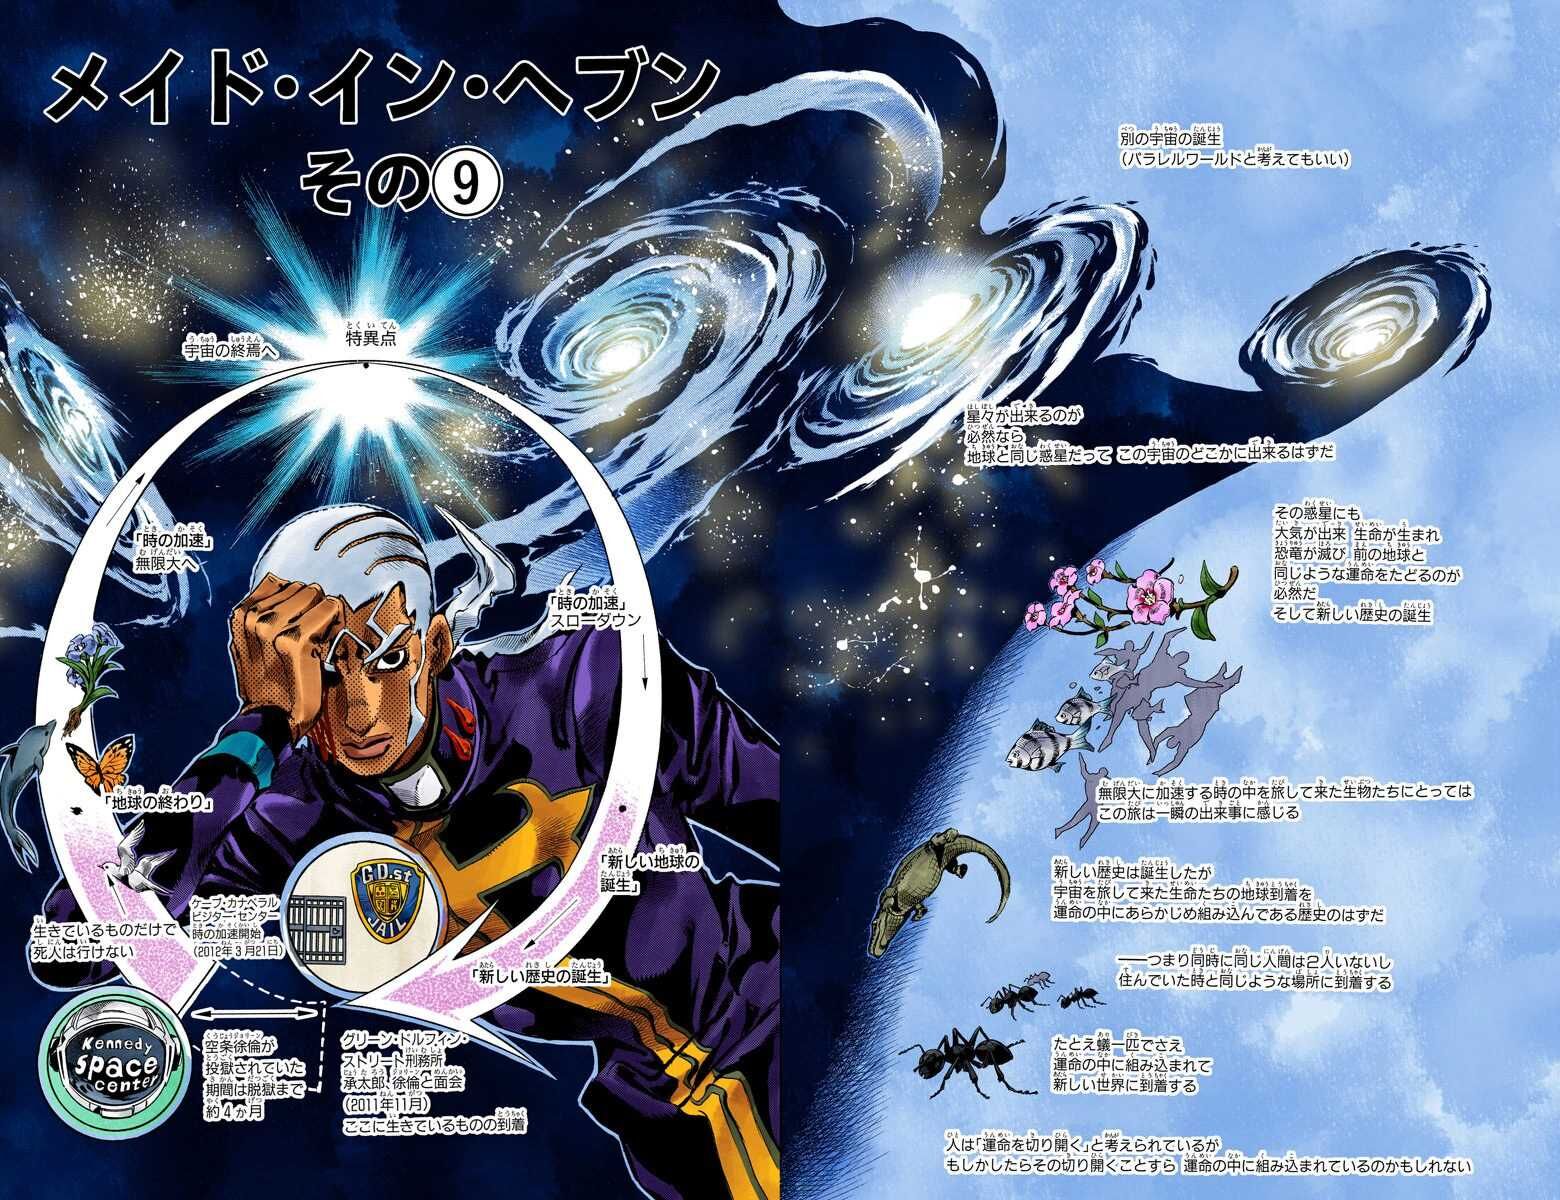 A humanoid jojo's part 4 stand with a sleek and futuristic design, with two  large, metallic hands, and is able to manipulate space and gravity in all  forms